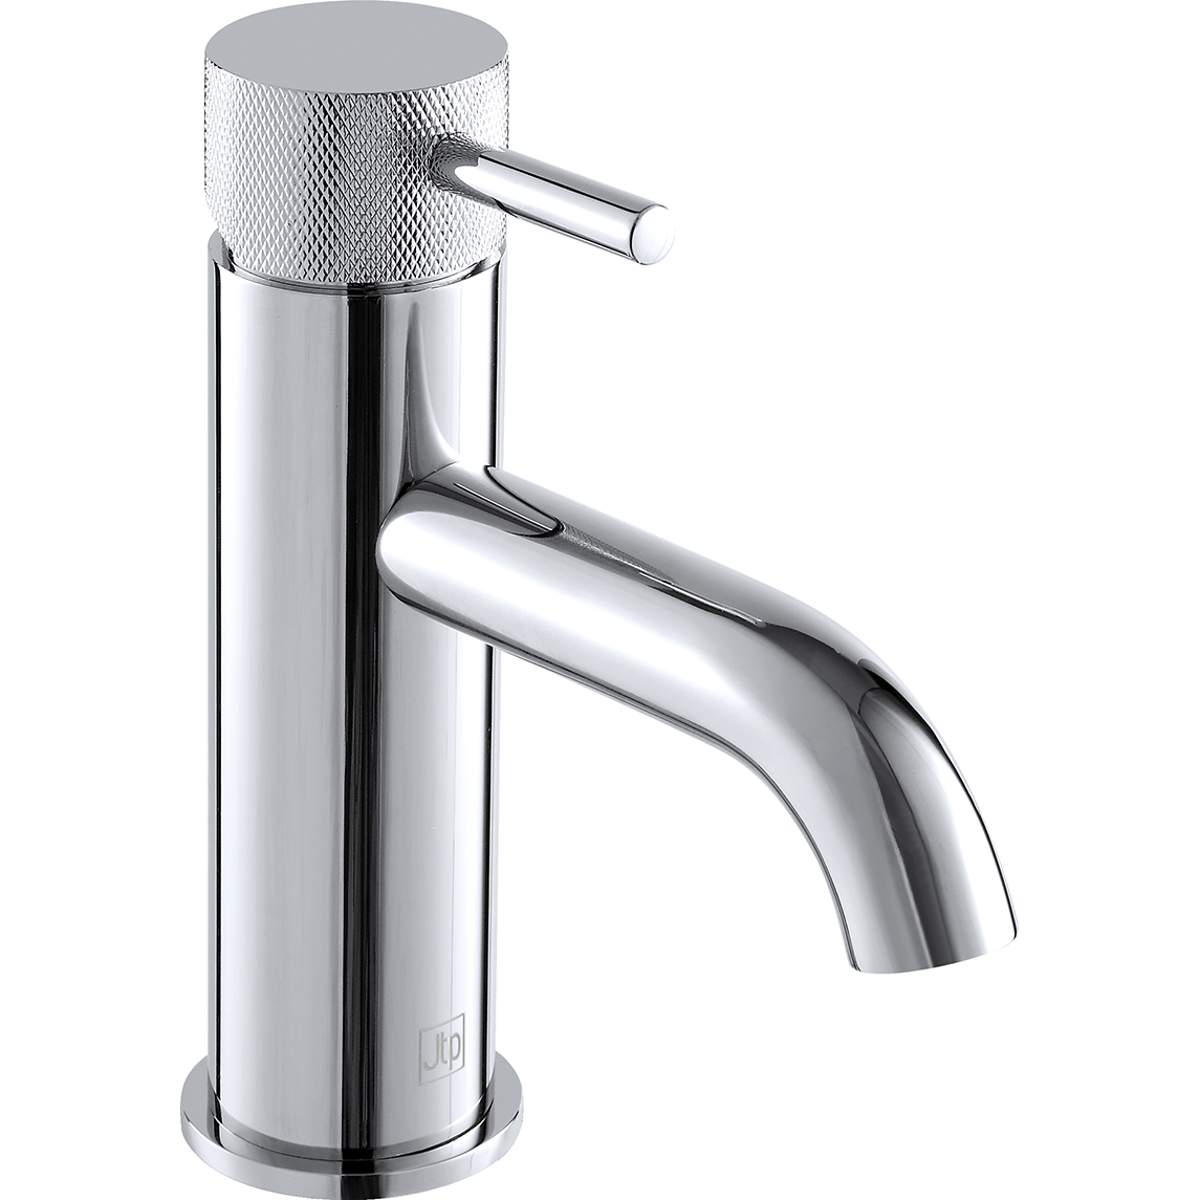 JTP Florence Single Lever Basin Mixer with Designer Handle (DH15008A)